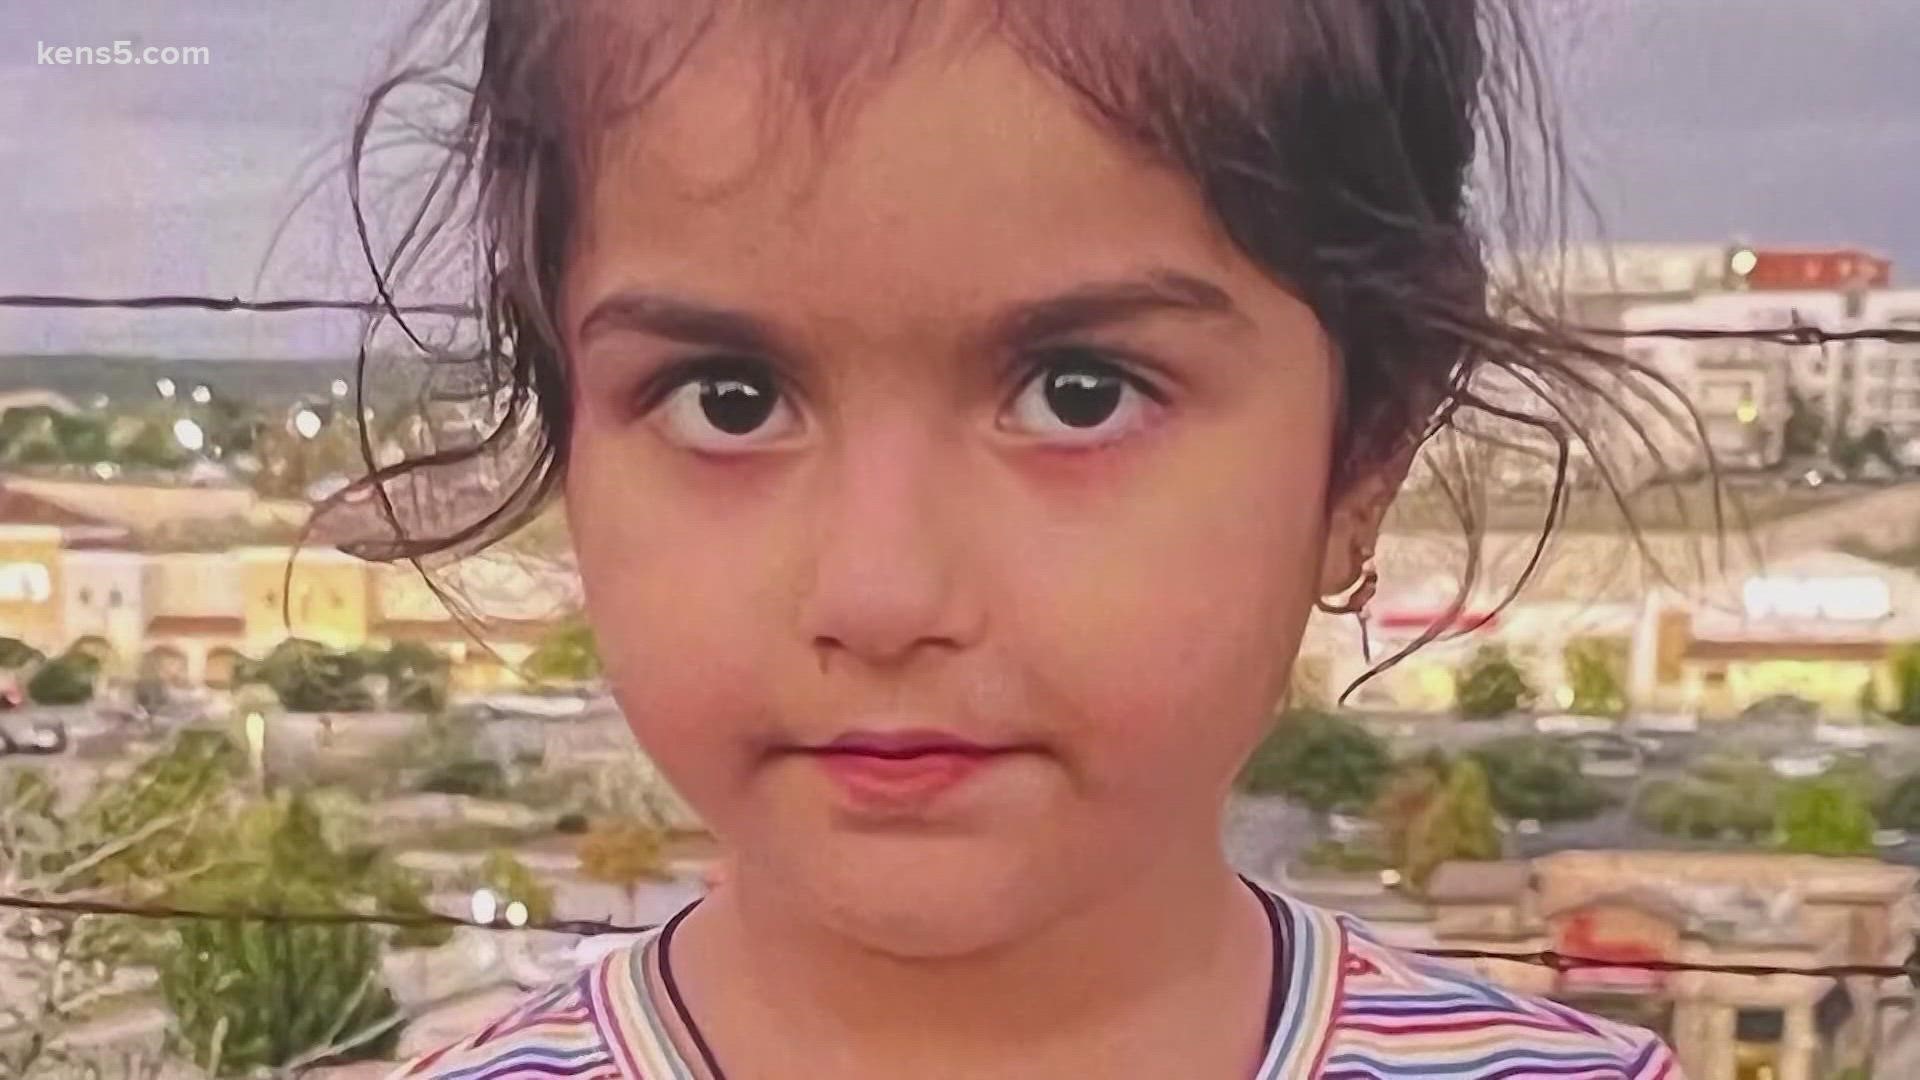 Lina Khil was last seen playing outside at the Villas del Cabo apartments off Fredericksburg Road between 4-5 p.m. on Dec. 20.